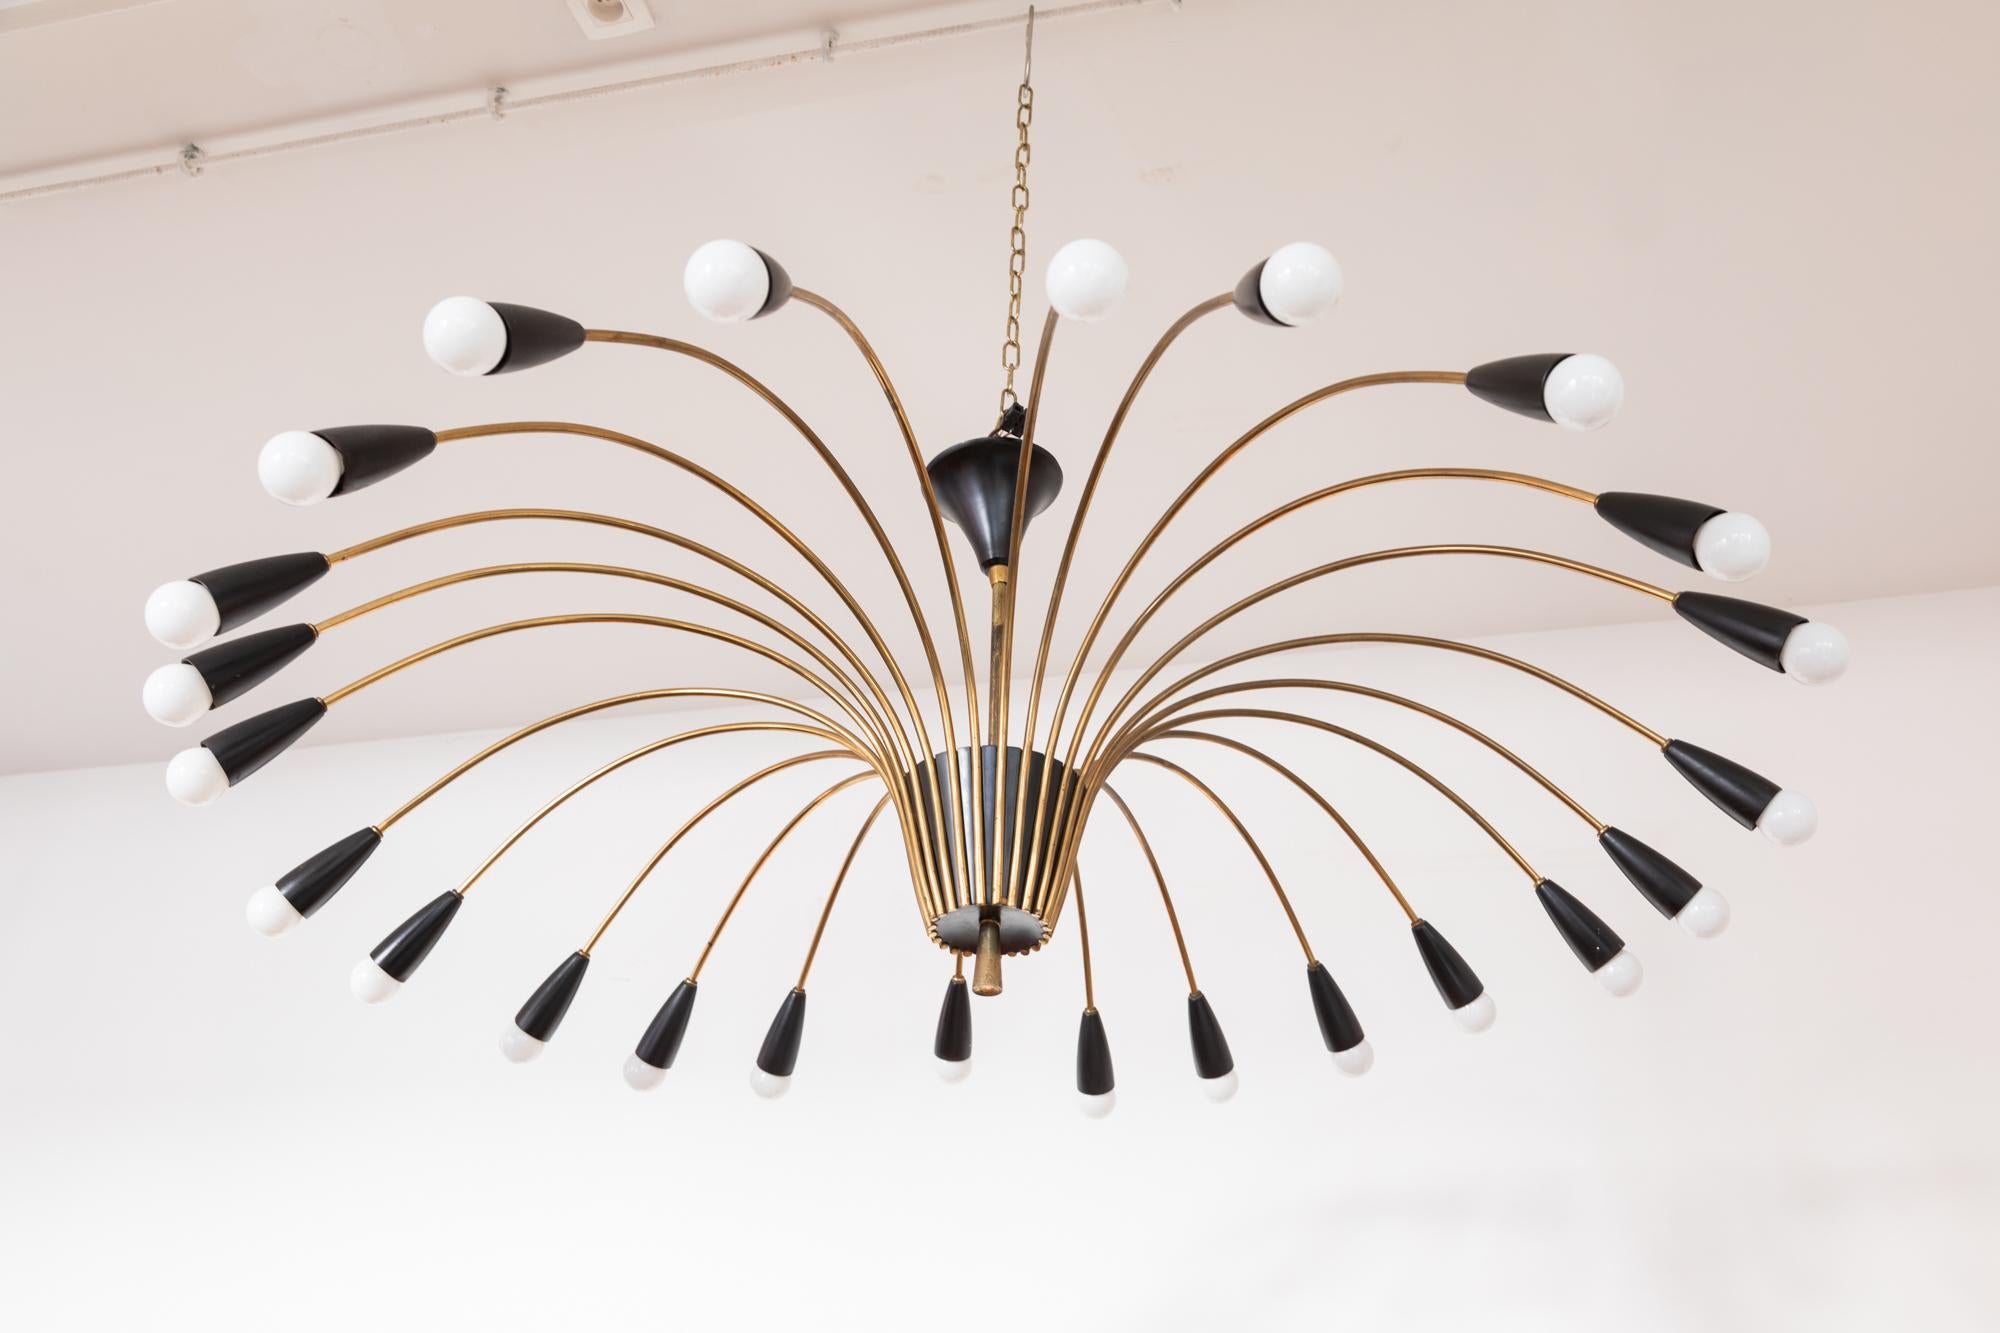 Midcentury chandelier flush mount featuring a sunray of elegant brass arms with contrasting black enamel. 24 bulbs.
Designed by Kaiser Germany. Mint condition. Dimension: 110 W x 45 H x 110 D cm.